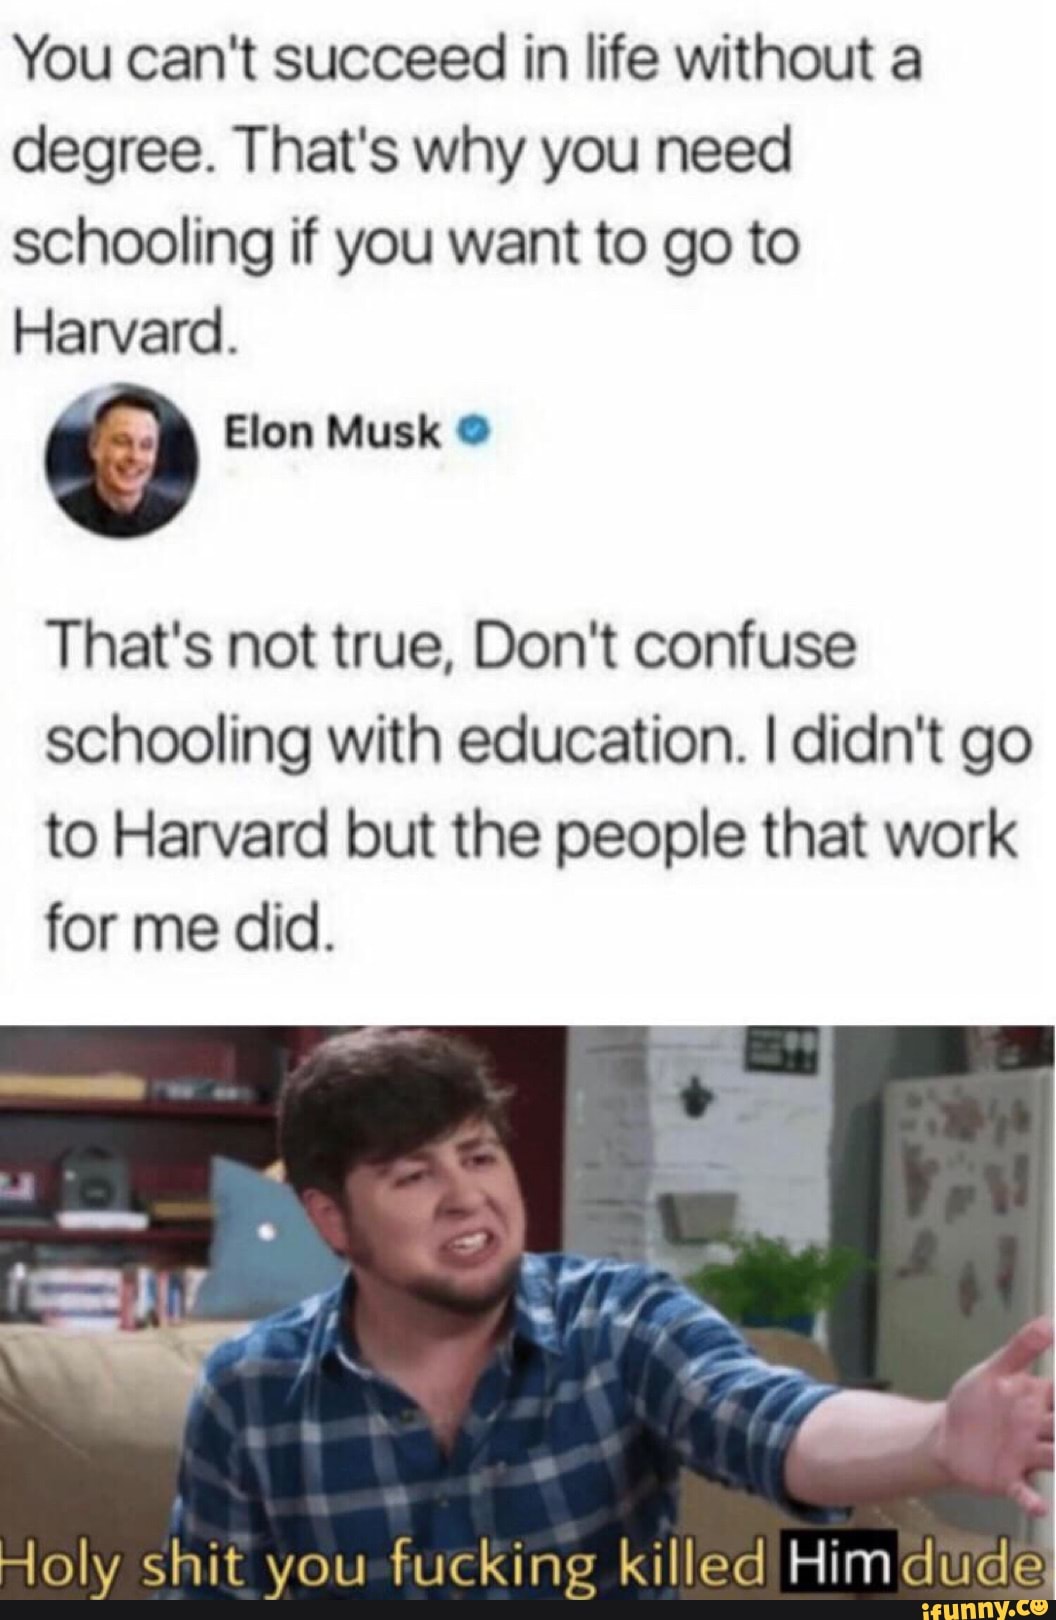 holy shit you fucking killed her dude - You can't succeed in life without a degree. That's why you need schooling if you want to go to Harvard Elon Musk That's not true, Don't confuse schooling with education. I didn't go to Harvard but the people that wo